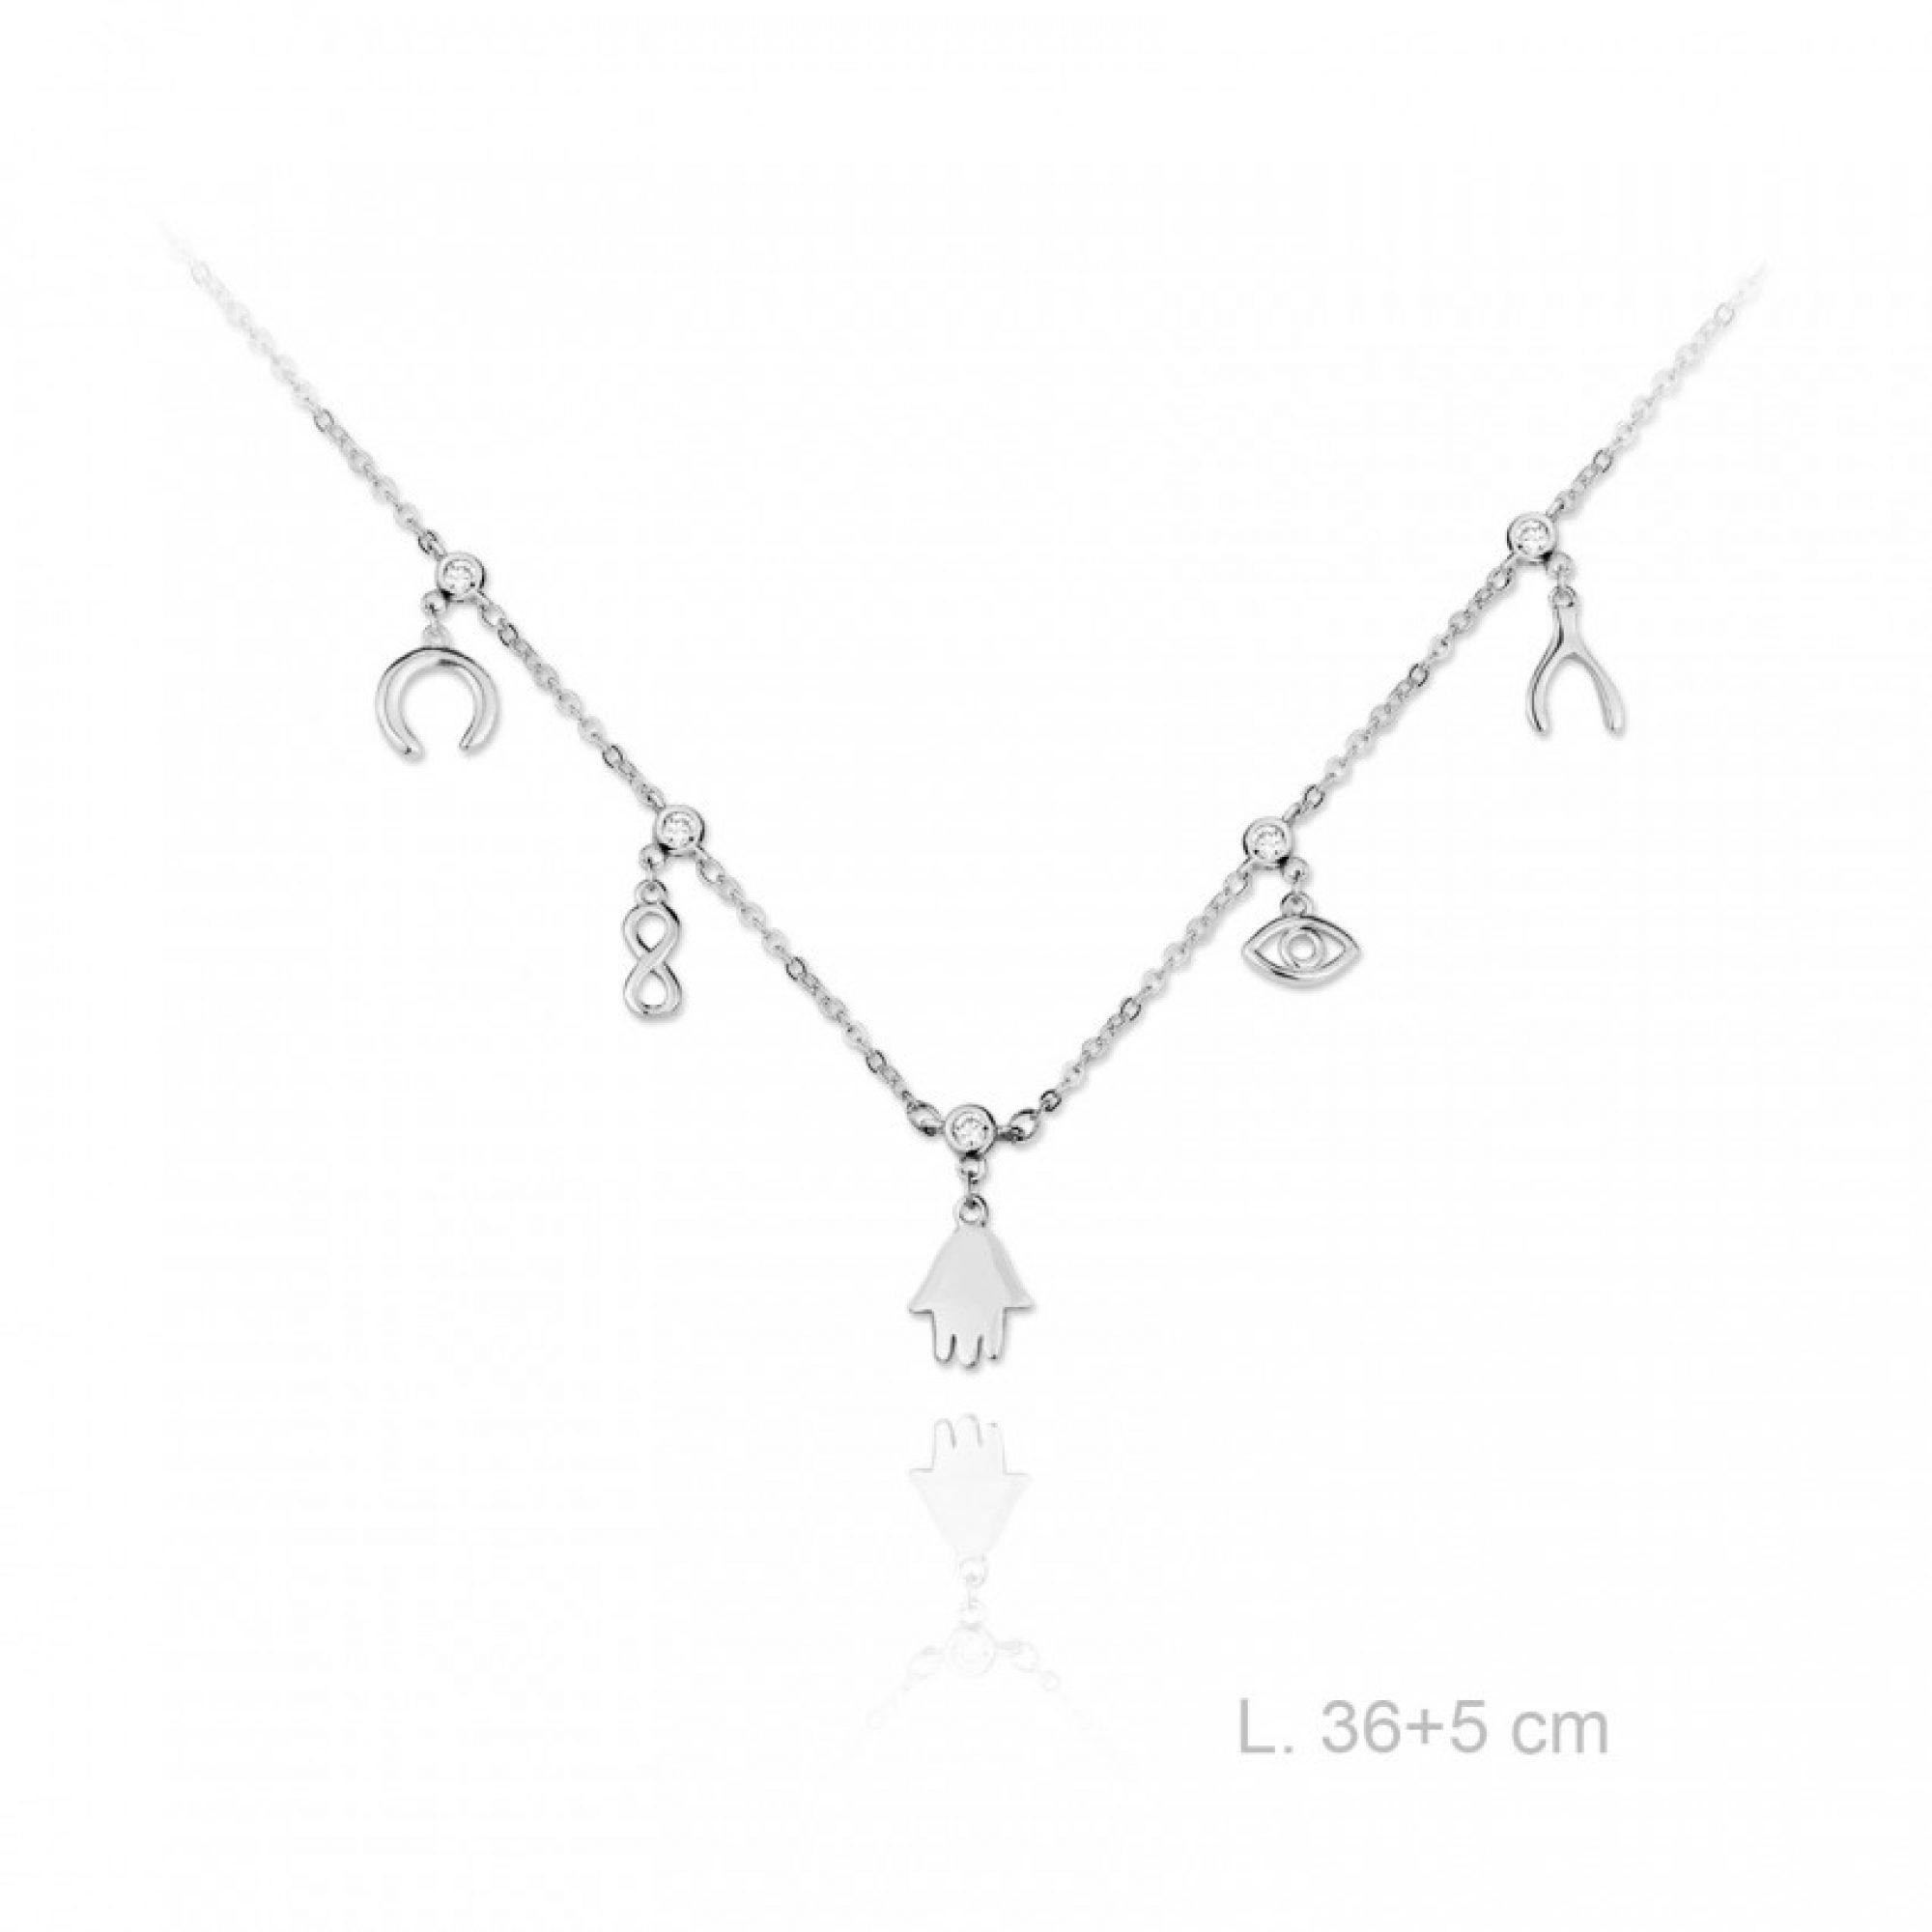 Silver necklace with zircon stones and good luck charms